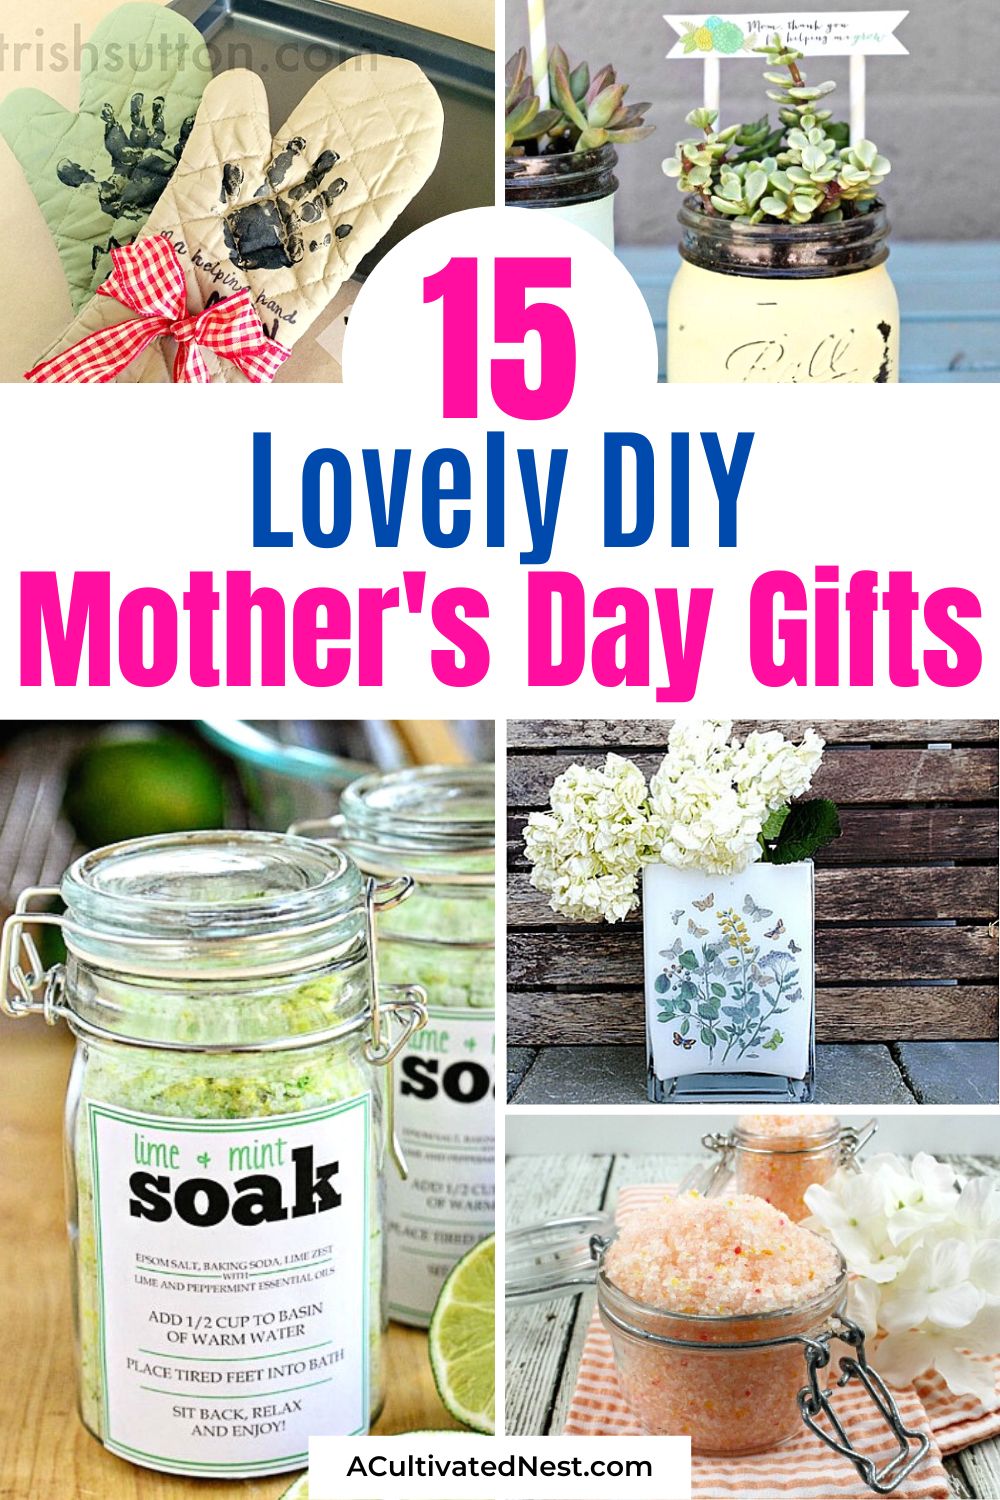 15 DIY Mother's Day Gifts Any Mother Would Love- Make Mother's Day extra special with these DIY Mother's Day gift ideas! Show your love and appreciation with personalized and handmade gifts that will touch your mom's heart. Get inspired now! #DIYMothersDayGifts #HandmadeGifts #GiftIdeasForMom #MothersDay #ACultivatedNest